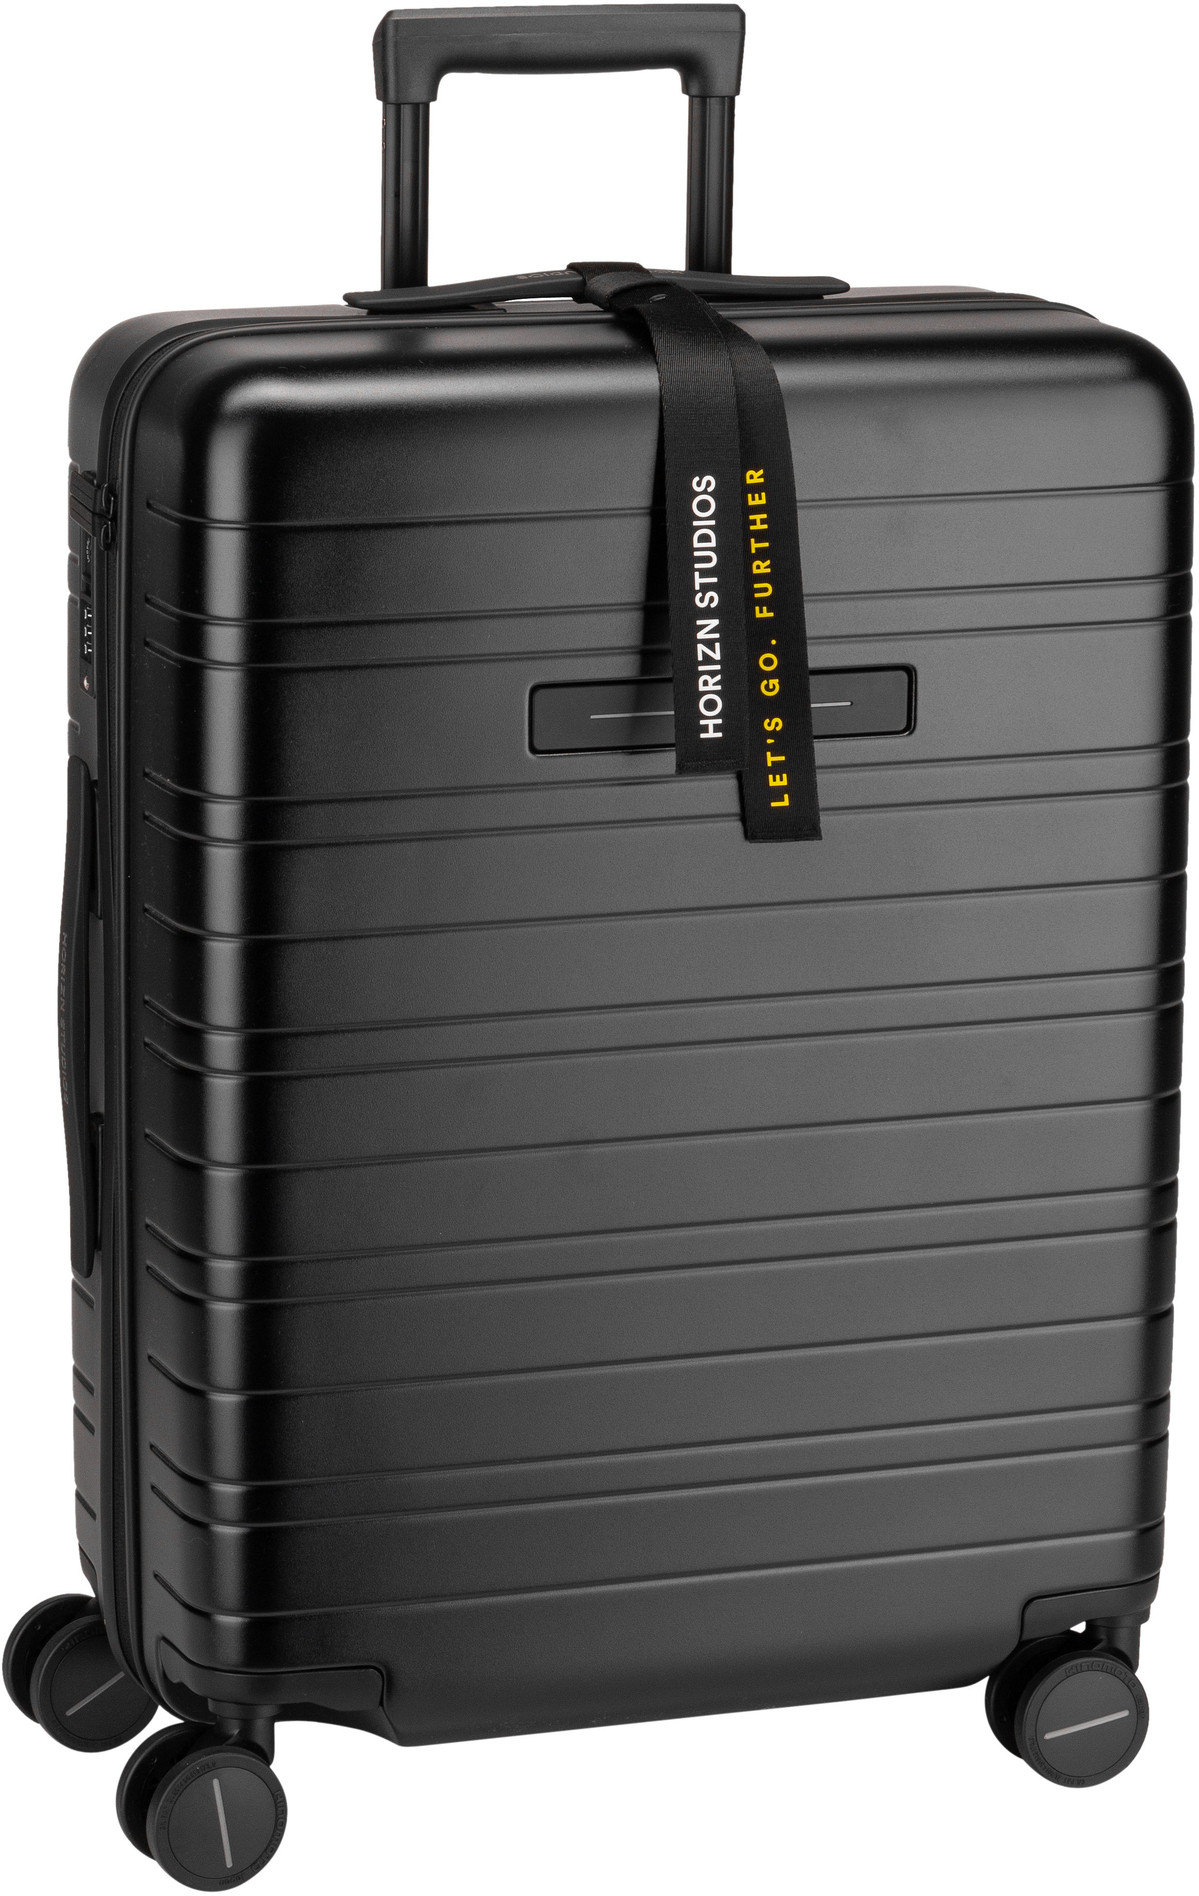 Horizn Studios H6 Essential Check-In Luggage - All Black